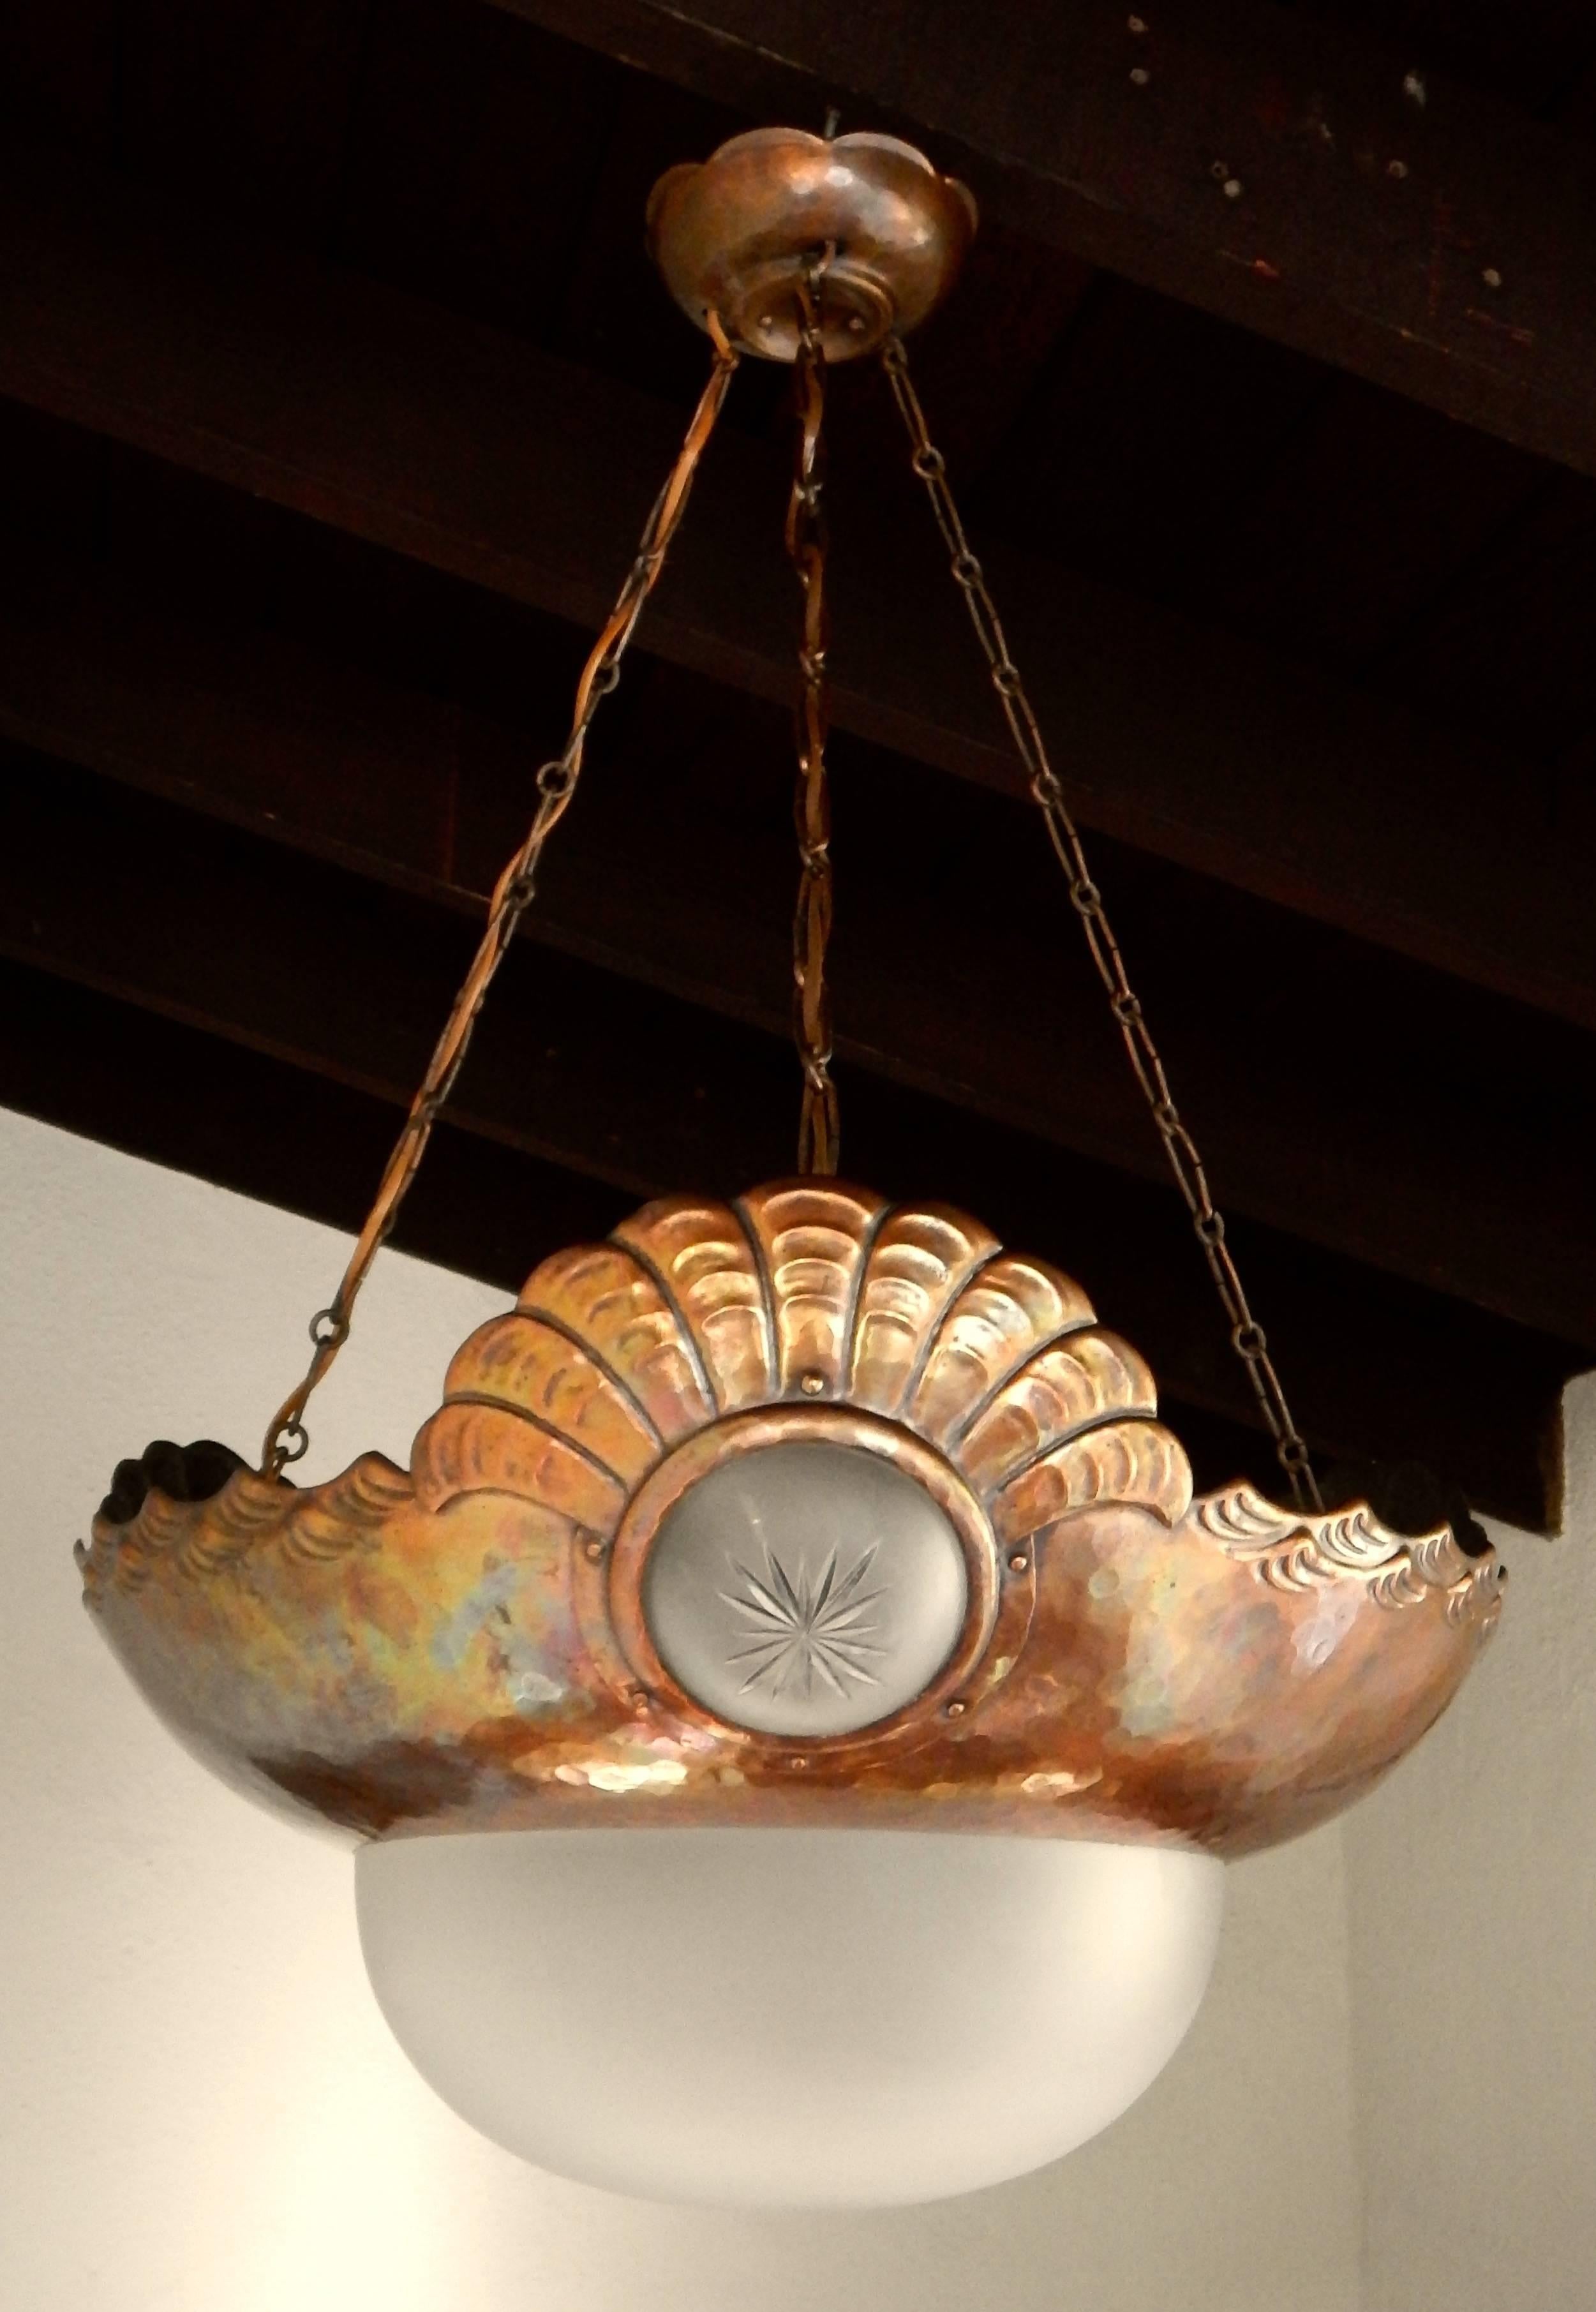 Swedish Arts & Crafts/Jugendstil hanging light fixture in hand-hammered copper. Motifs of seashell and waves. All original frosted glass. Freshly rewired with four receptacles for bulbs, Sweden, circa 1900-1910. Contact us with any questions.